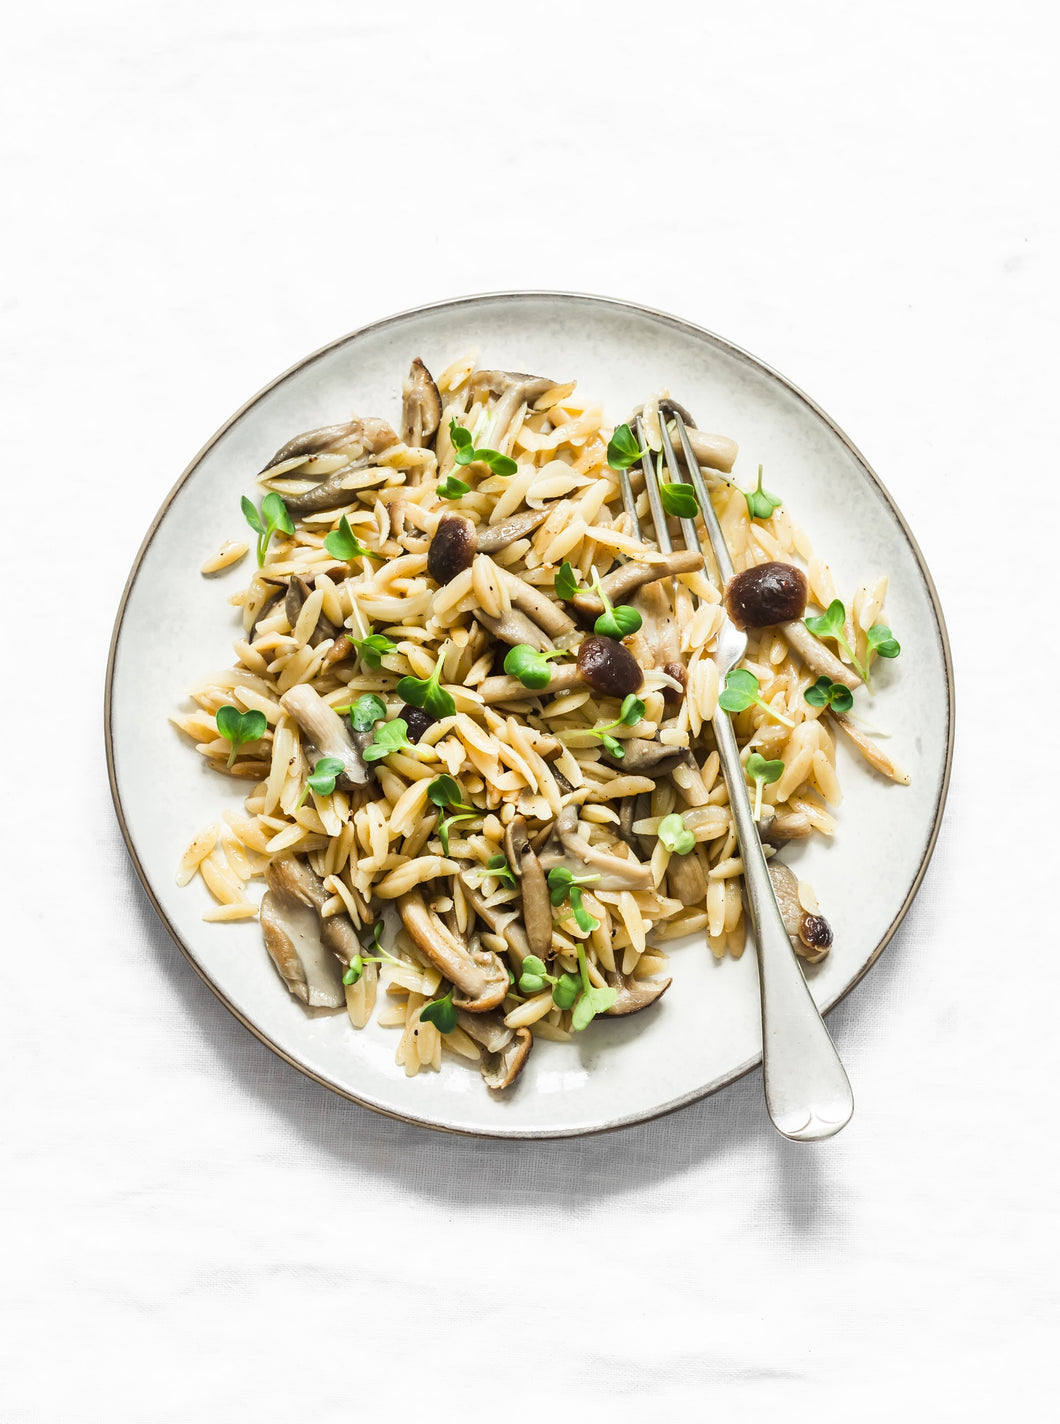 Toasted Orzo and Rice with Brussels Sprouts and Mushrooms